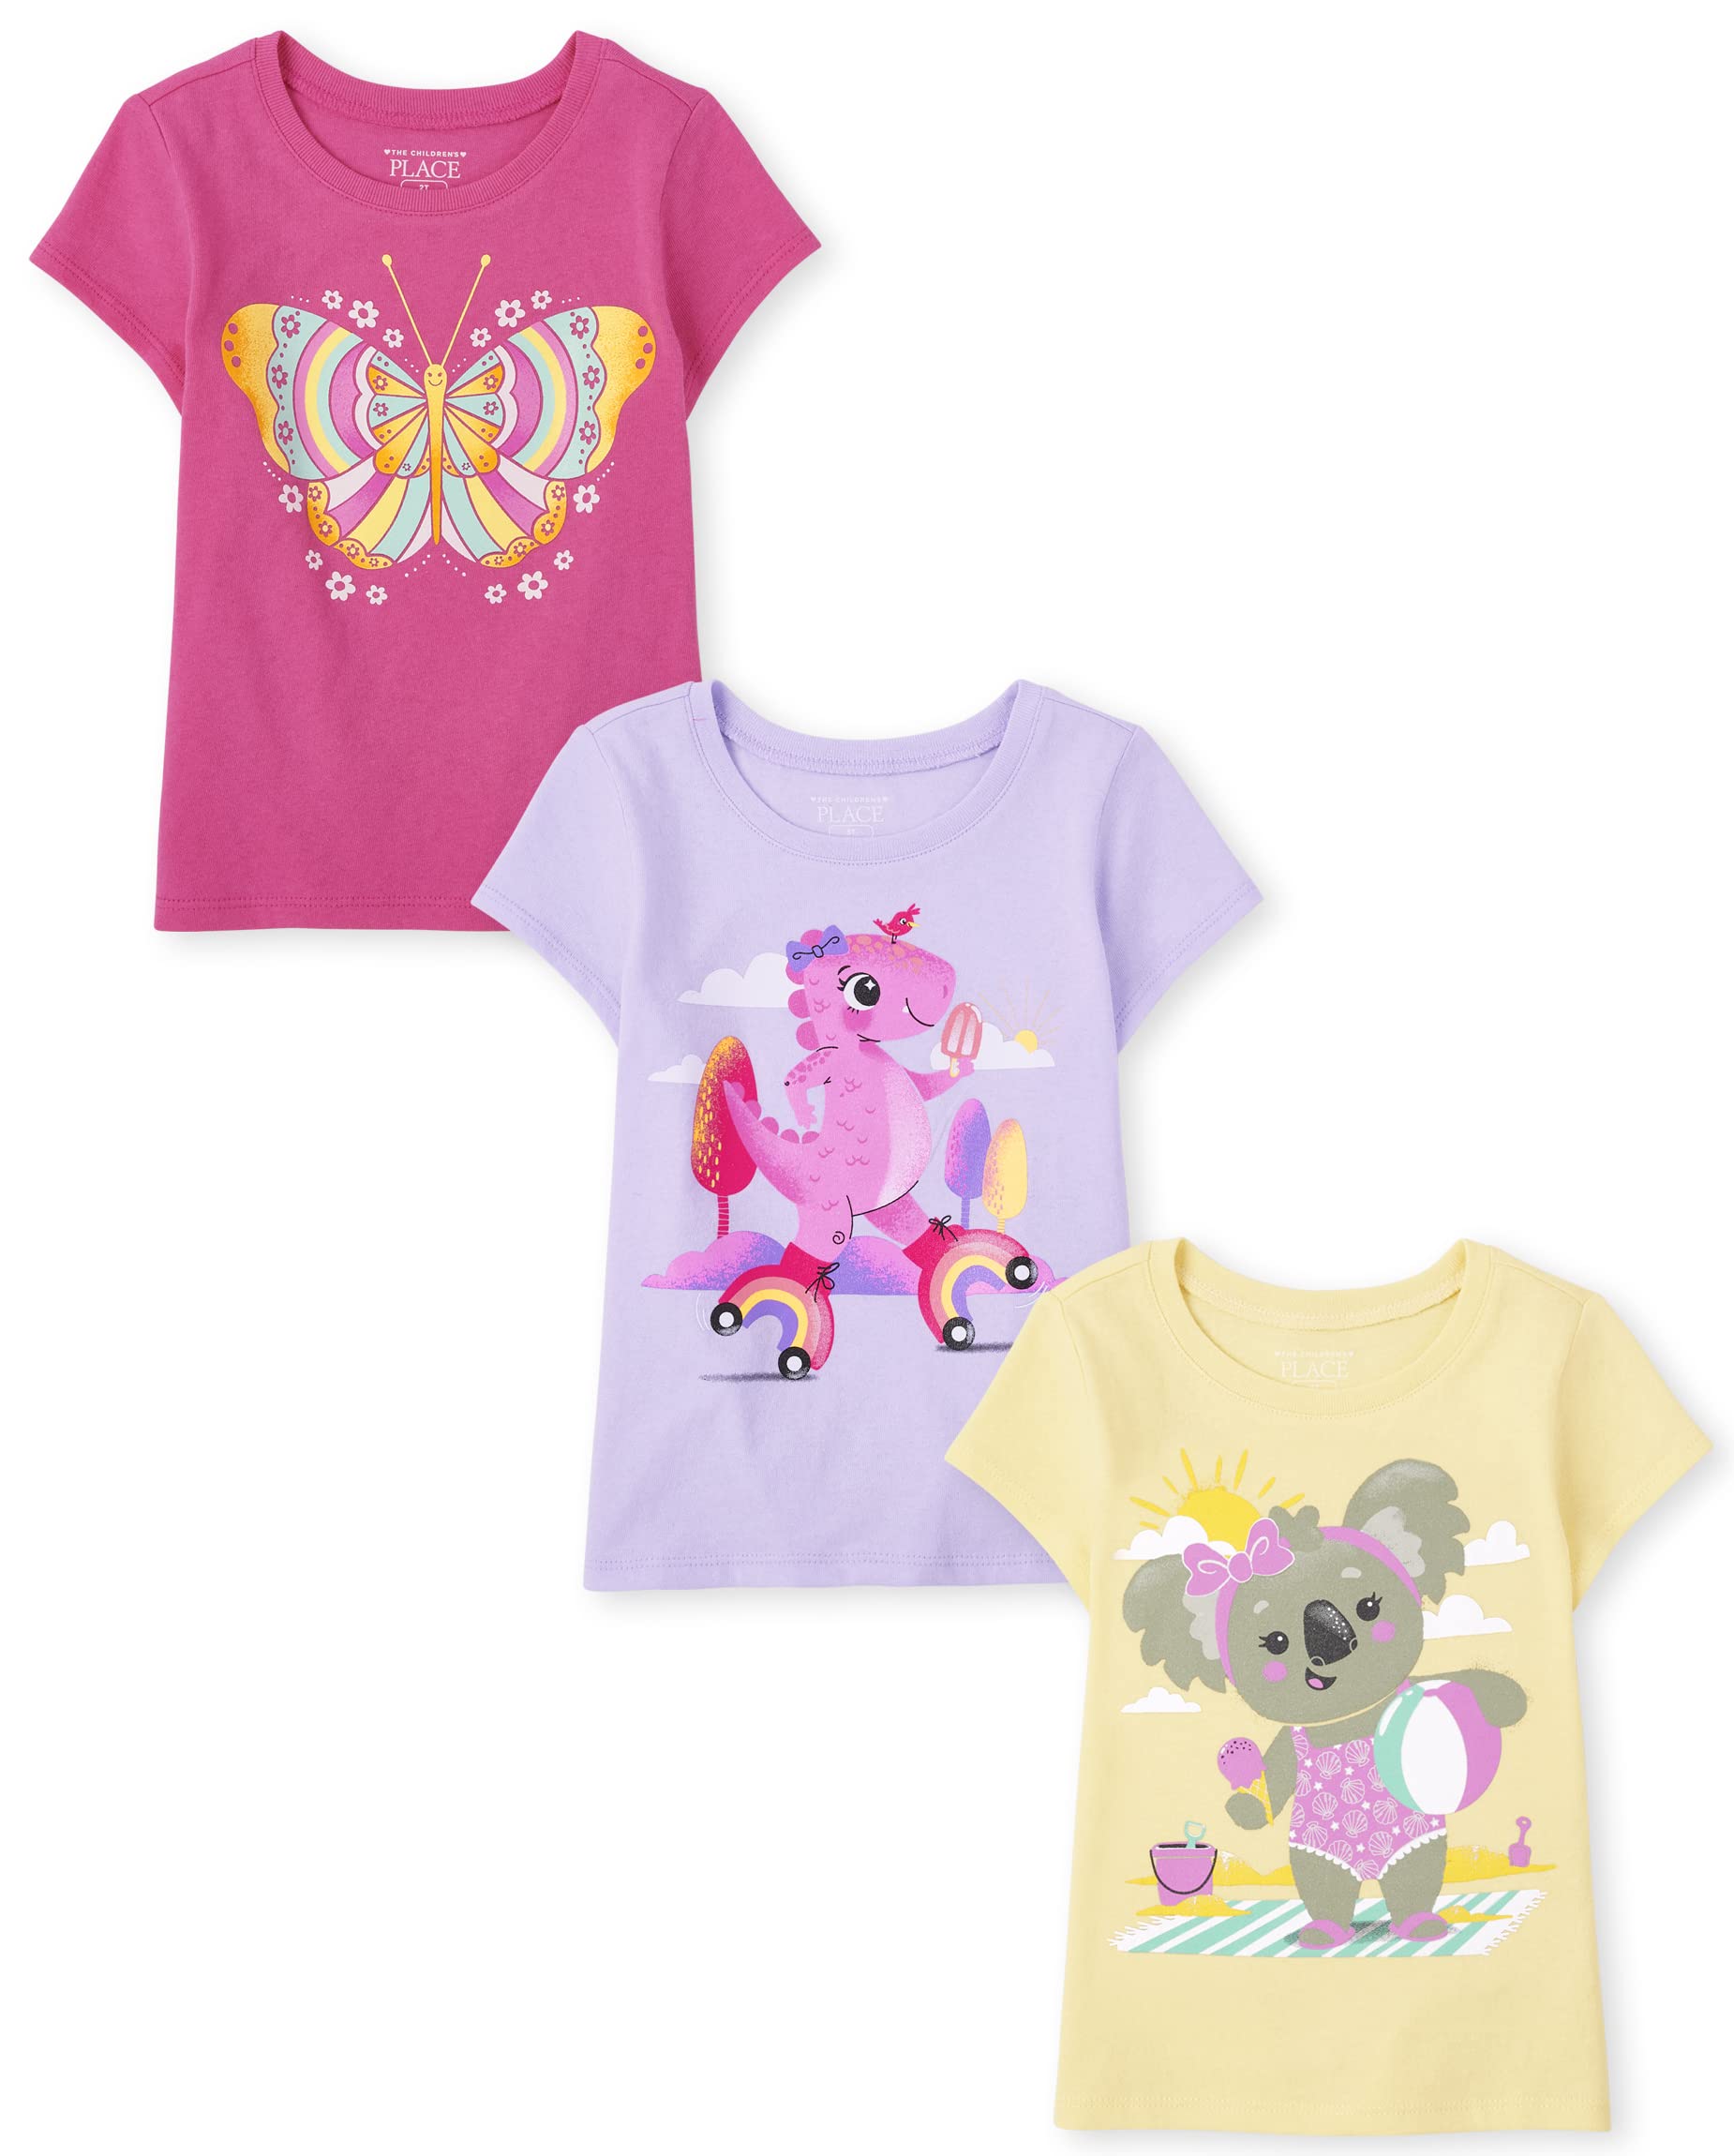 The Children's Place girls Baby Girls and Toddler Girls Short Sleeve Graphic T- Shirt 3-pack